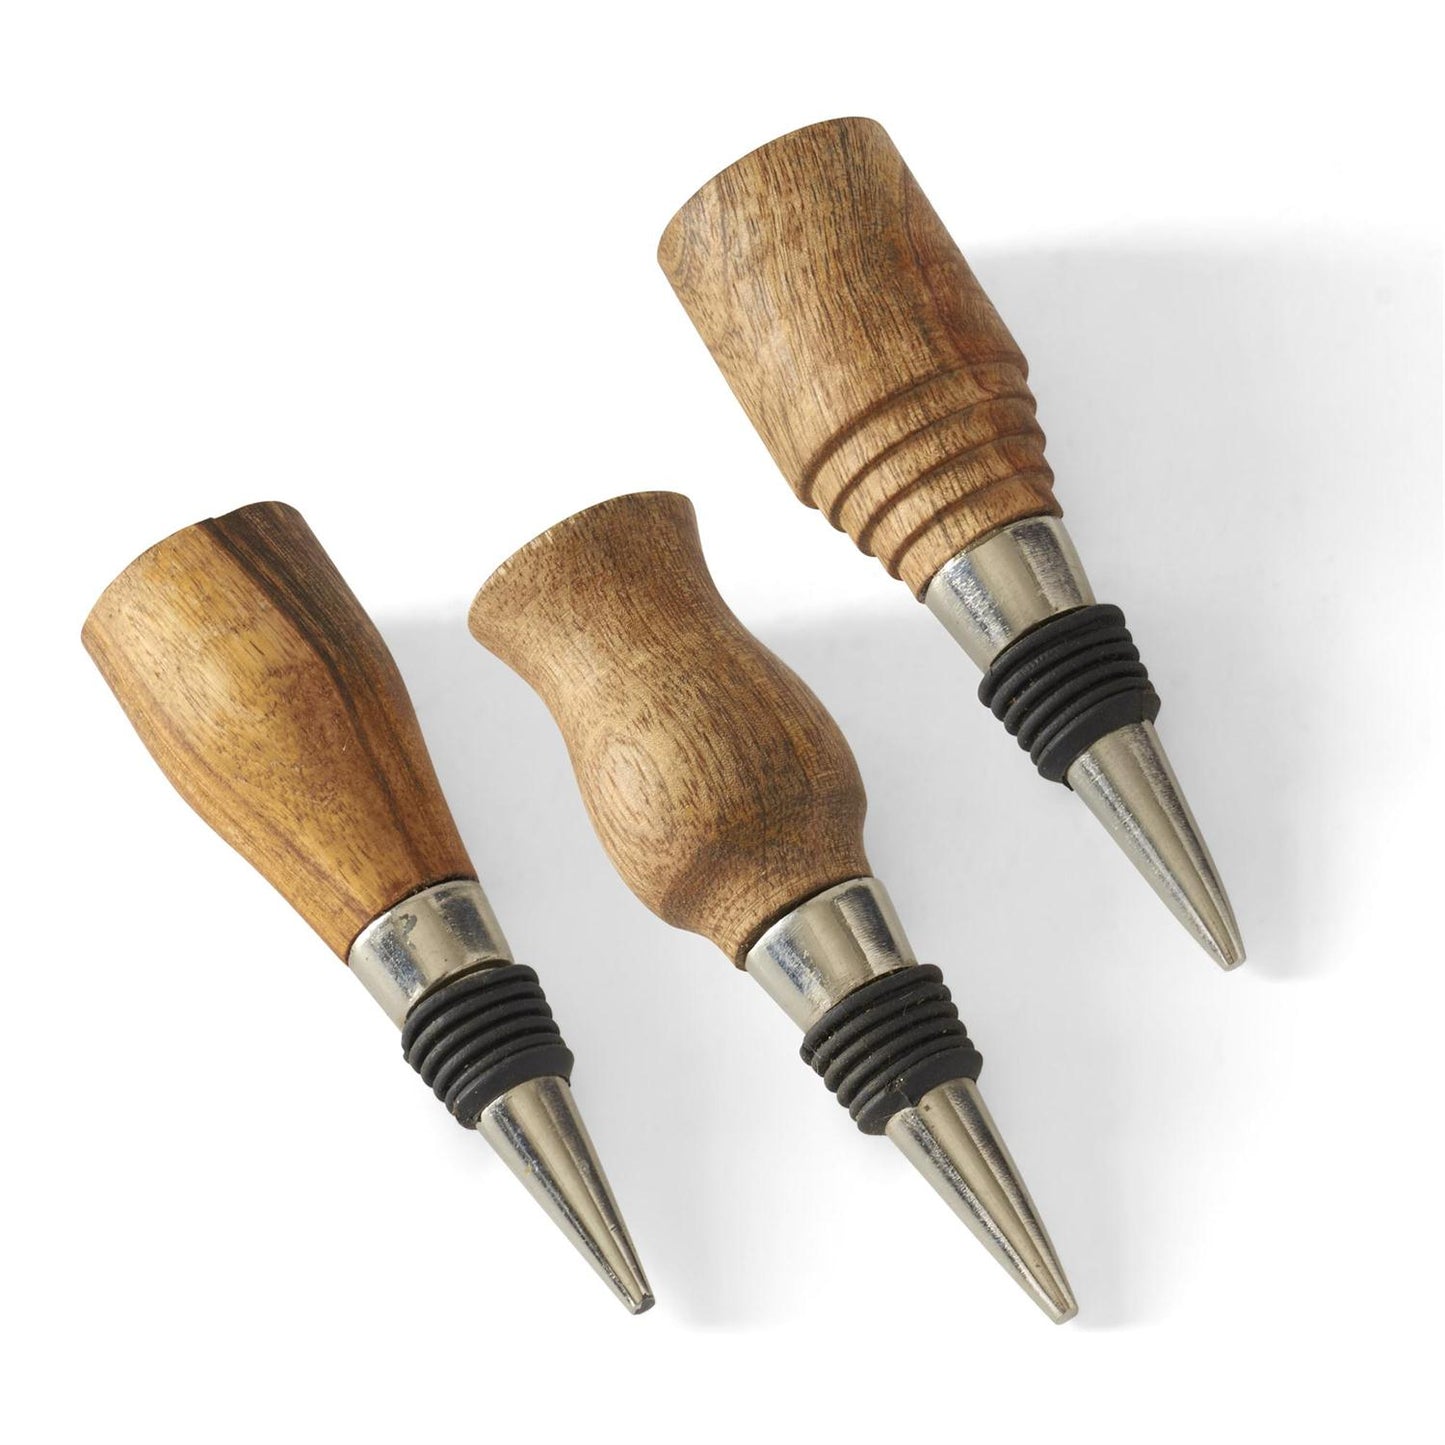 WOOD BOTTLE STOPPERS